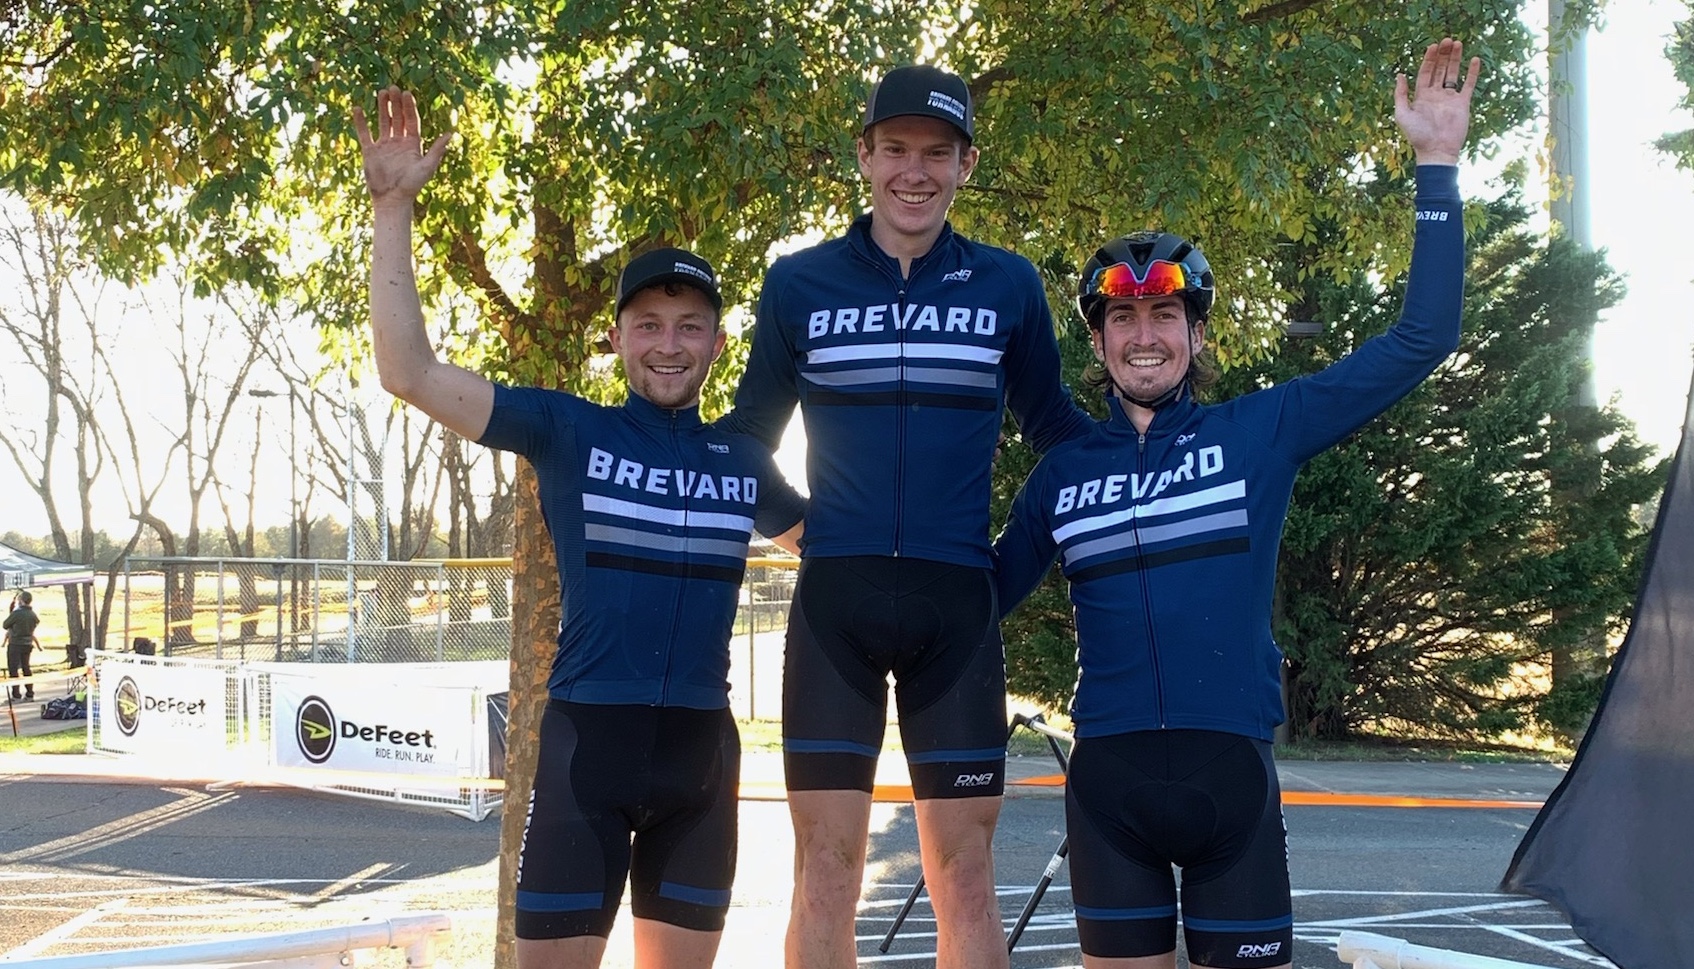 Brevard College student-athletes Tyler Clark (center) and Carson Beckett (left) are joined by BC alum and Assistant Coach Cypress Gorry for a clean podium sweep in the Pro Category 1/2/3 Cyclocross race in Charlotte.